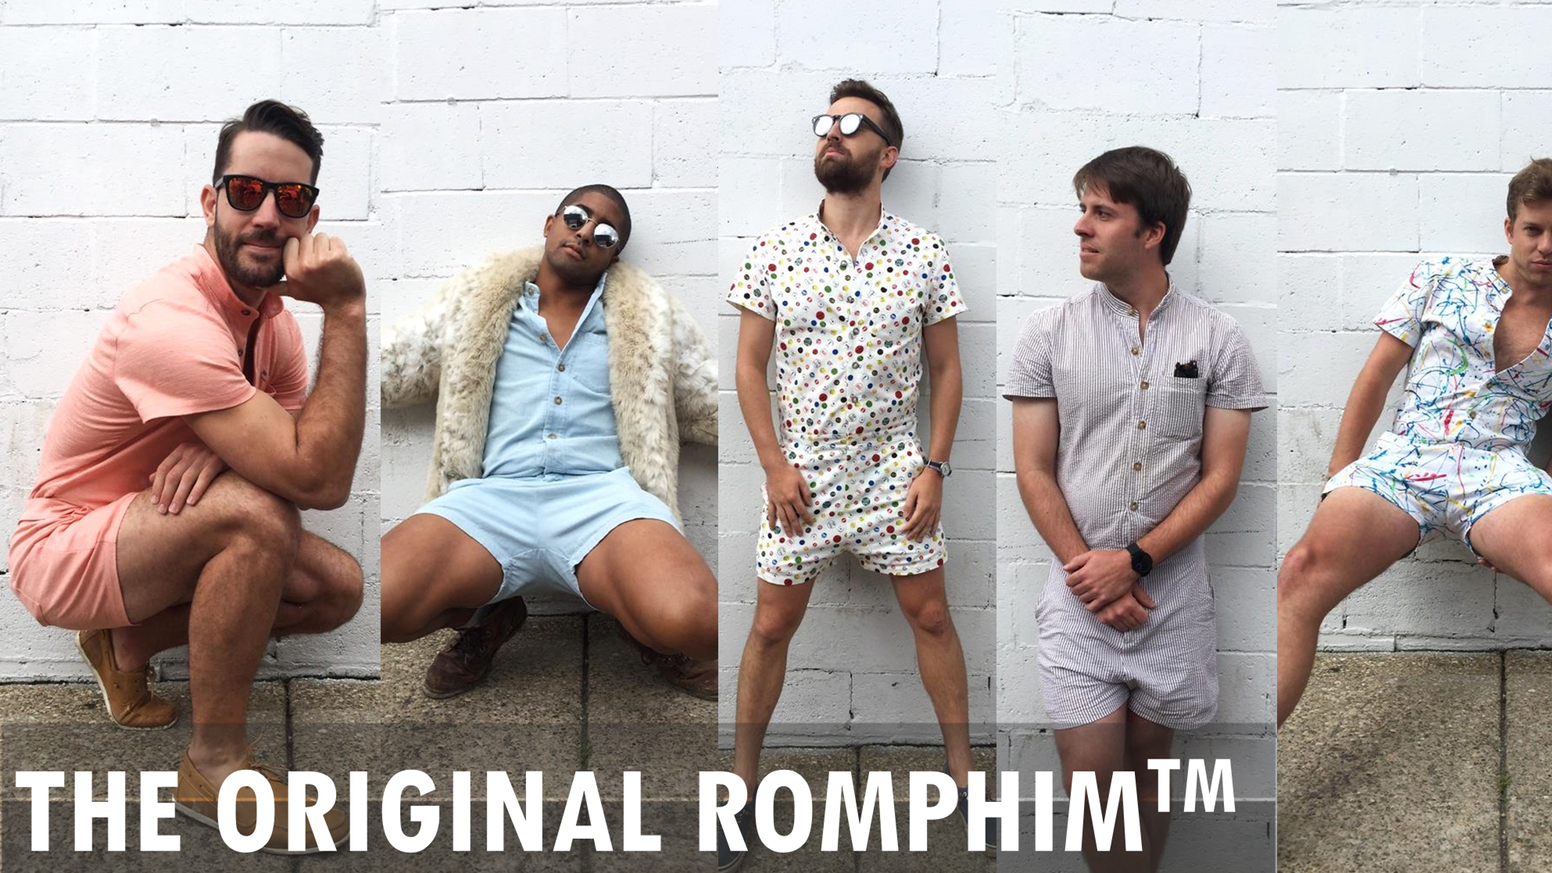 Hold up - rompers? 